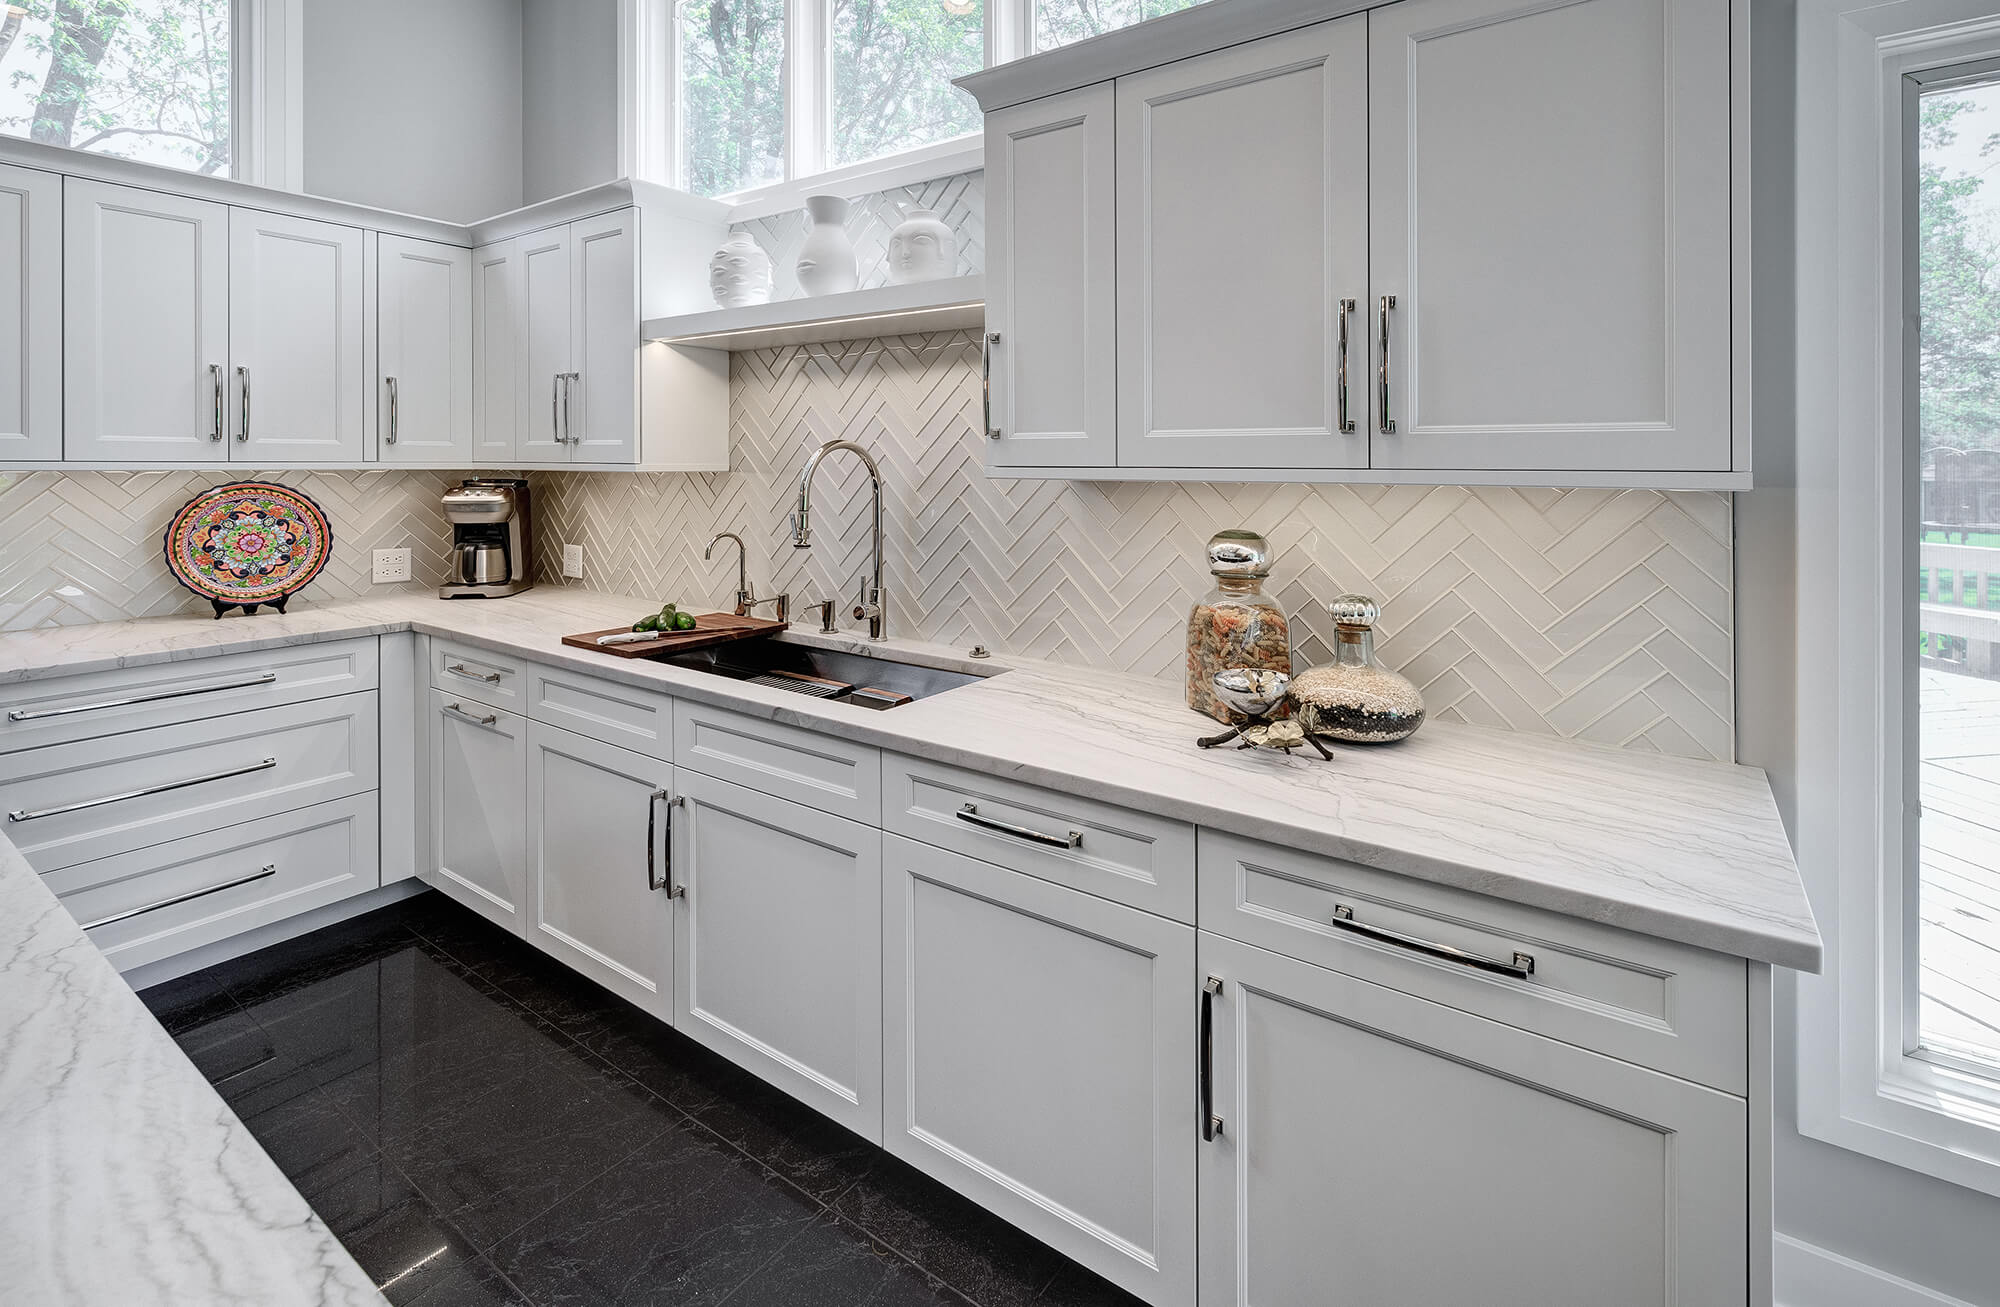 A wall of white cabinets with a hidden, panel ready dishwasher in a beautiful transitional kitchen design.